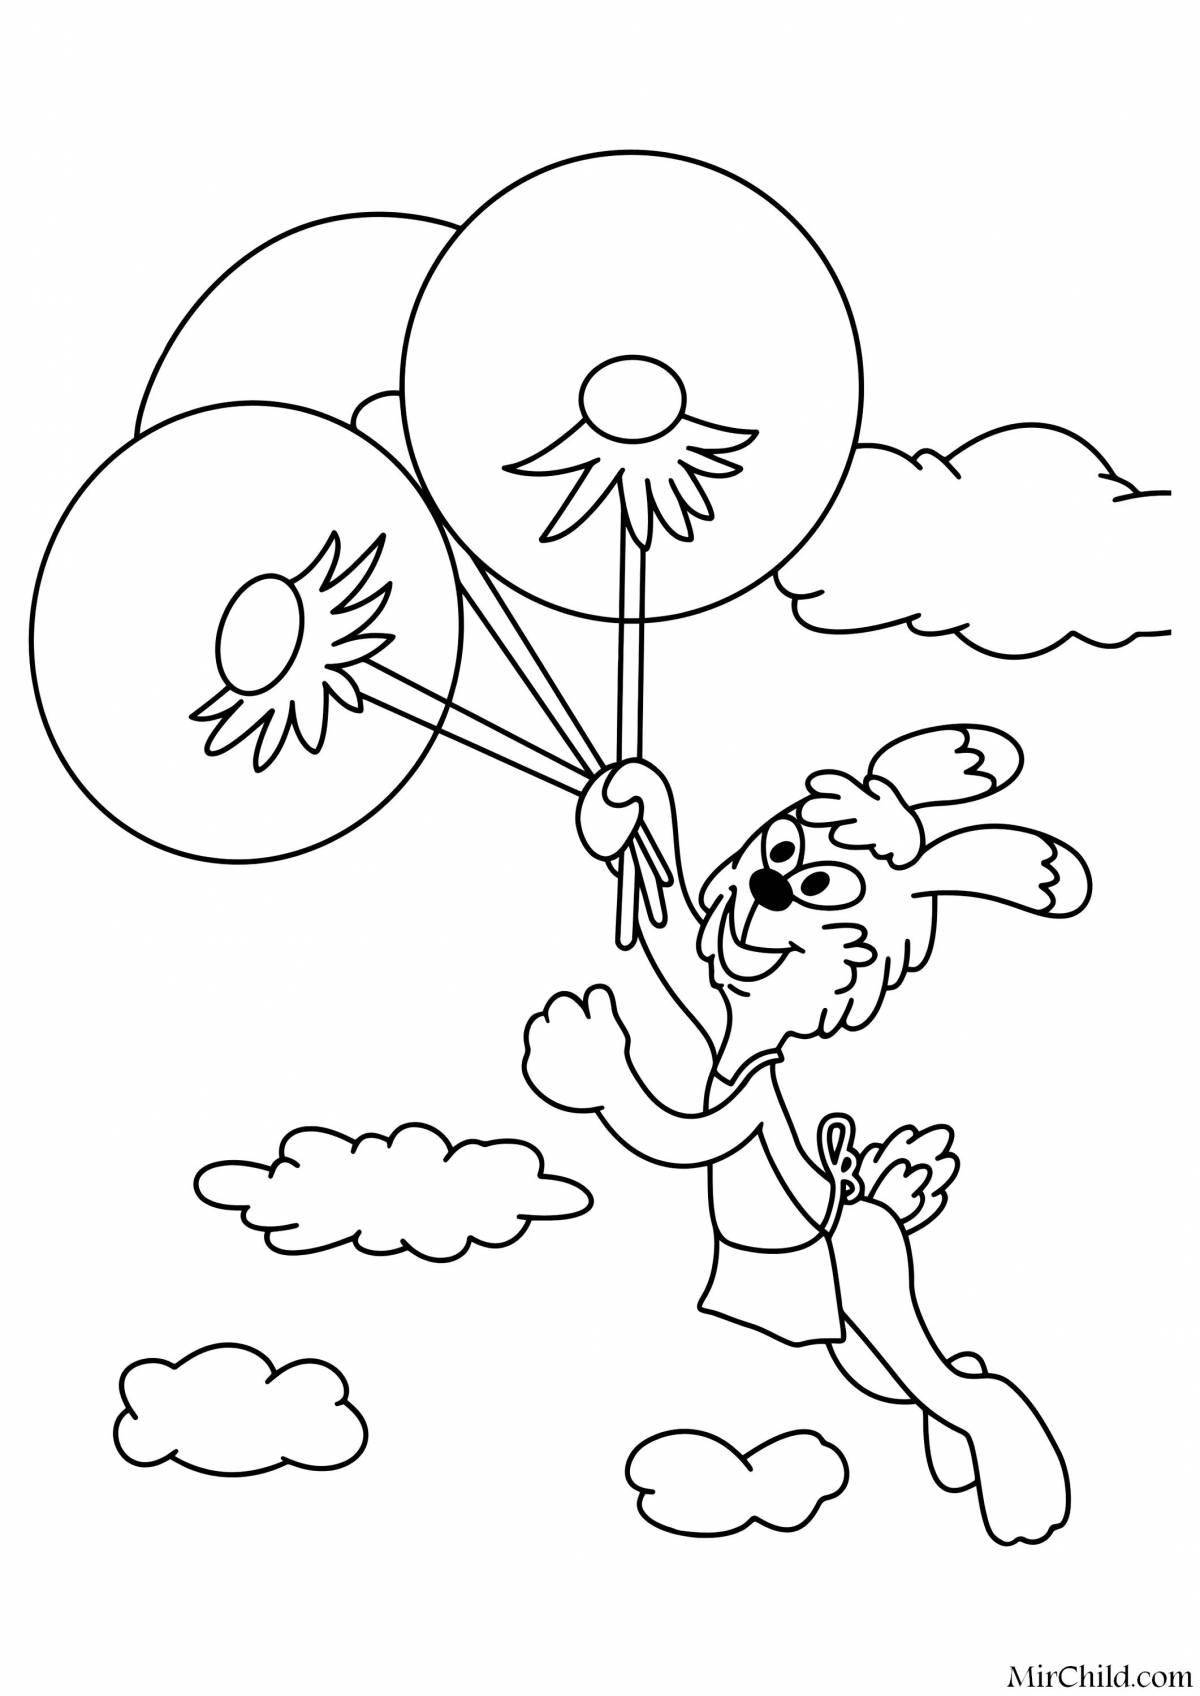 Hilarious hello coloring page